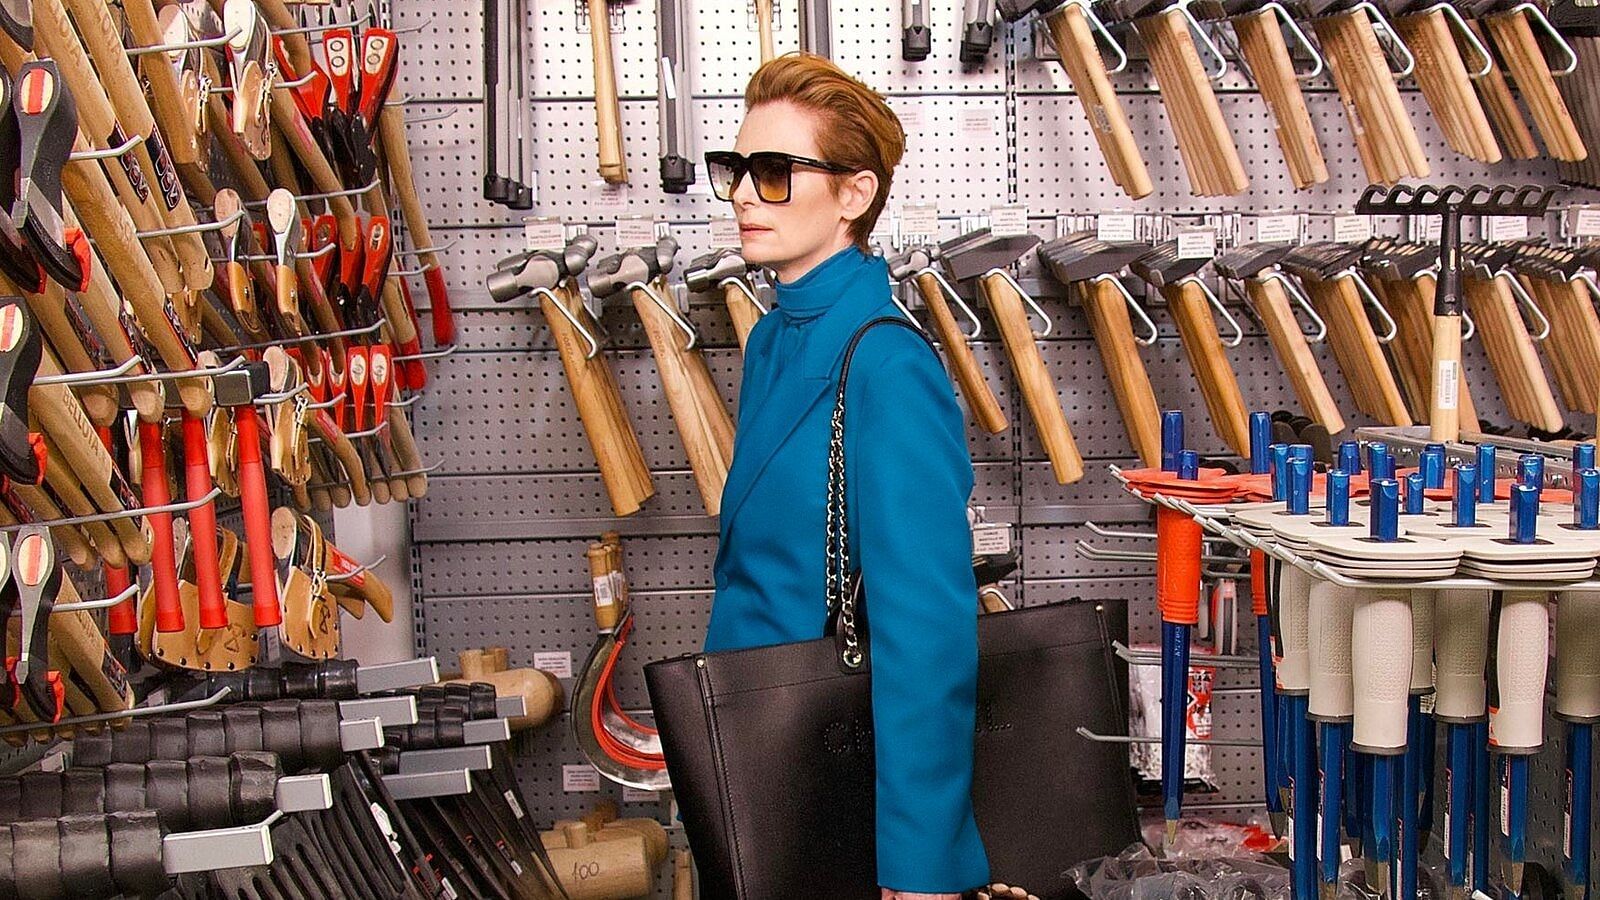 <div class="paragraphs"><p>Tilda Swinton in a hardware store in a still from 'The Human Voice'</p></div>